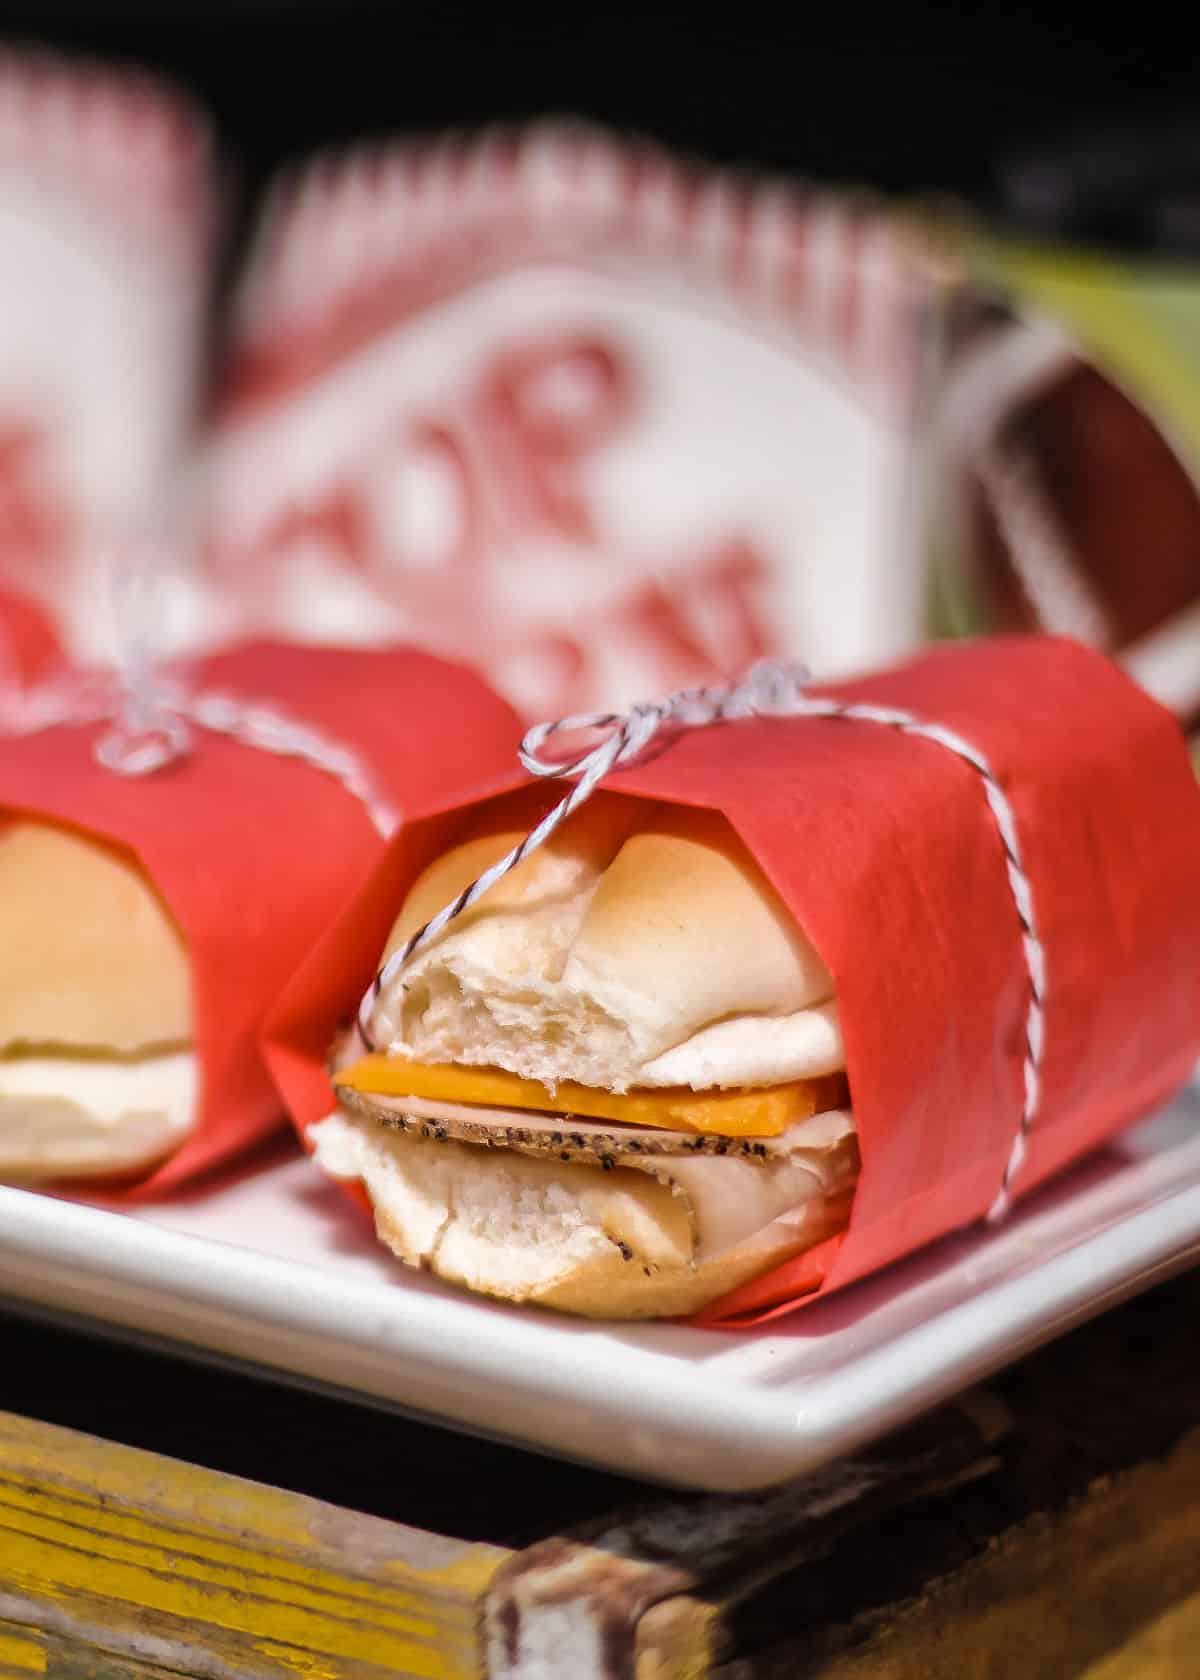 turkey and cheese sandwiches wrapped in red paper and tied with string.